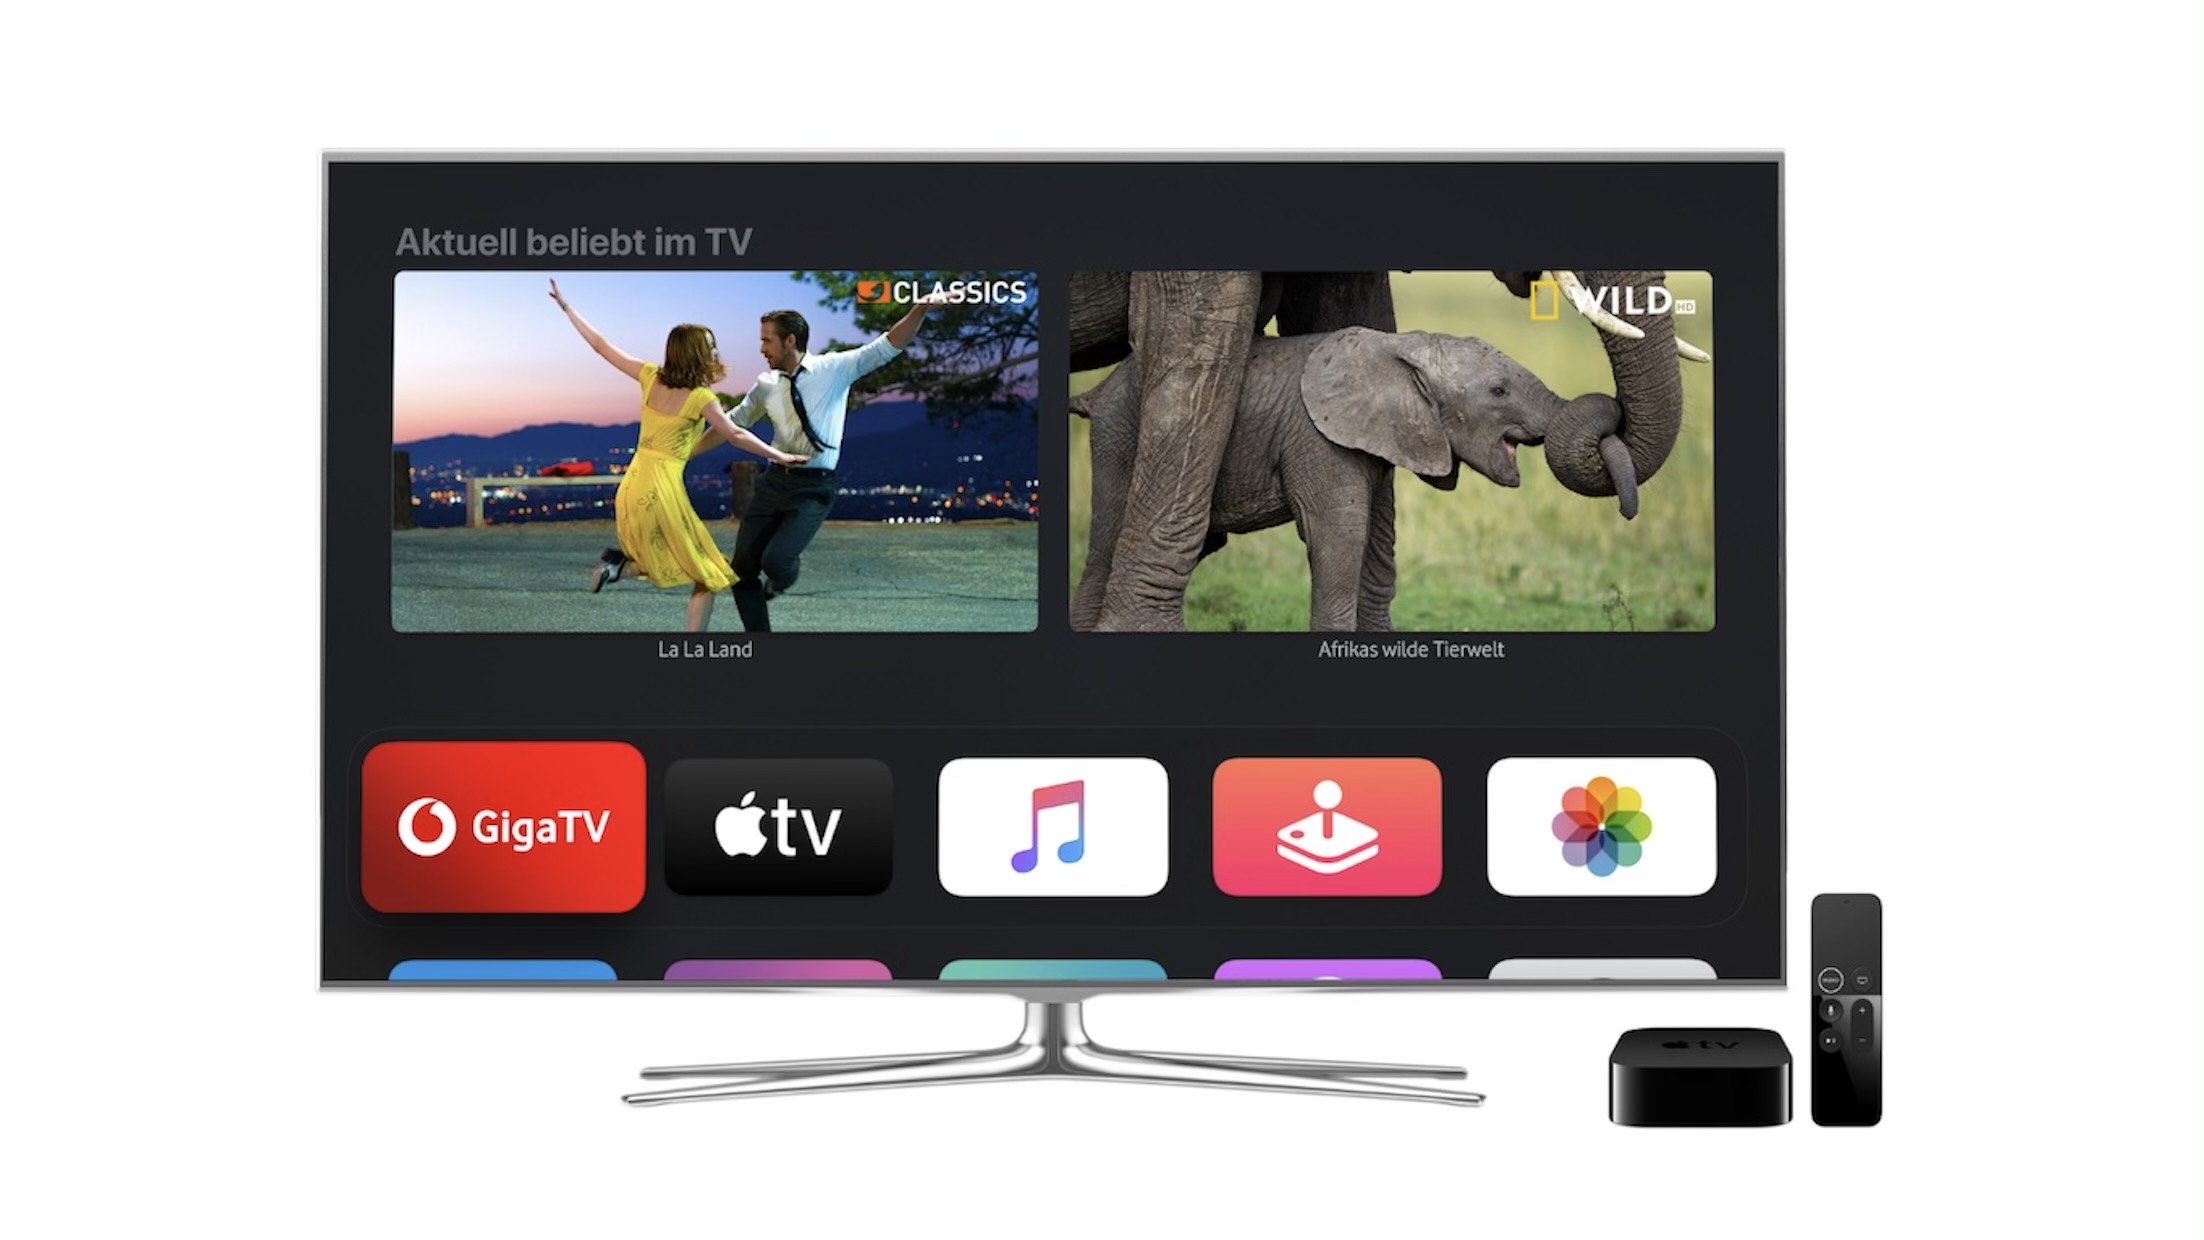 Vodafone now offering TV as free set-top box alternative for GigaTV customers in Germany - 9to5Mac